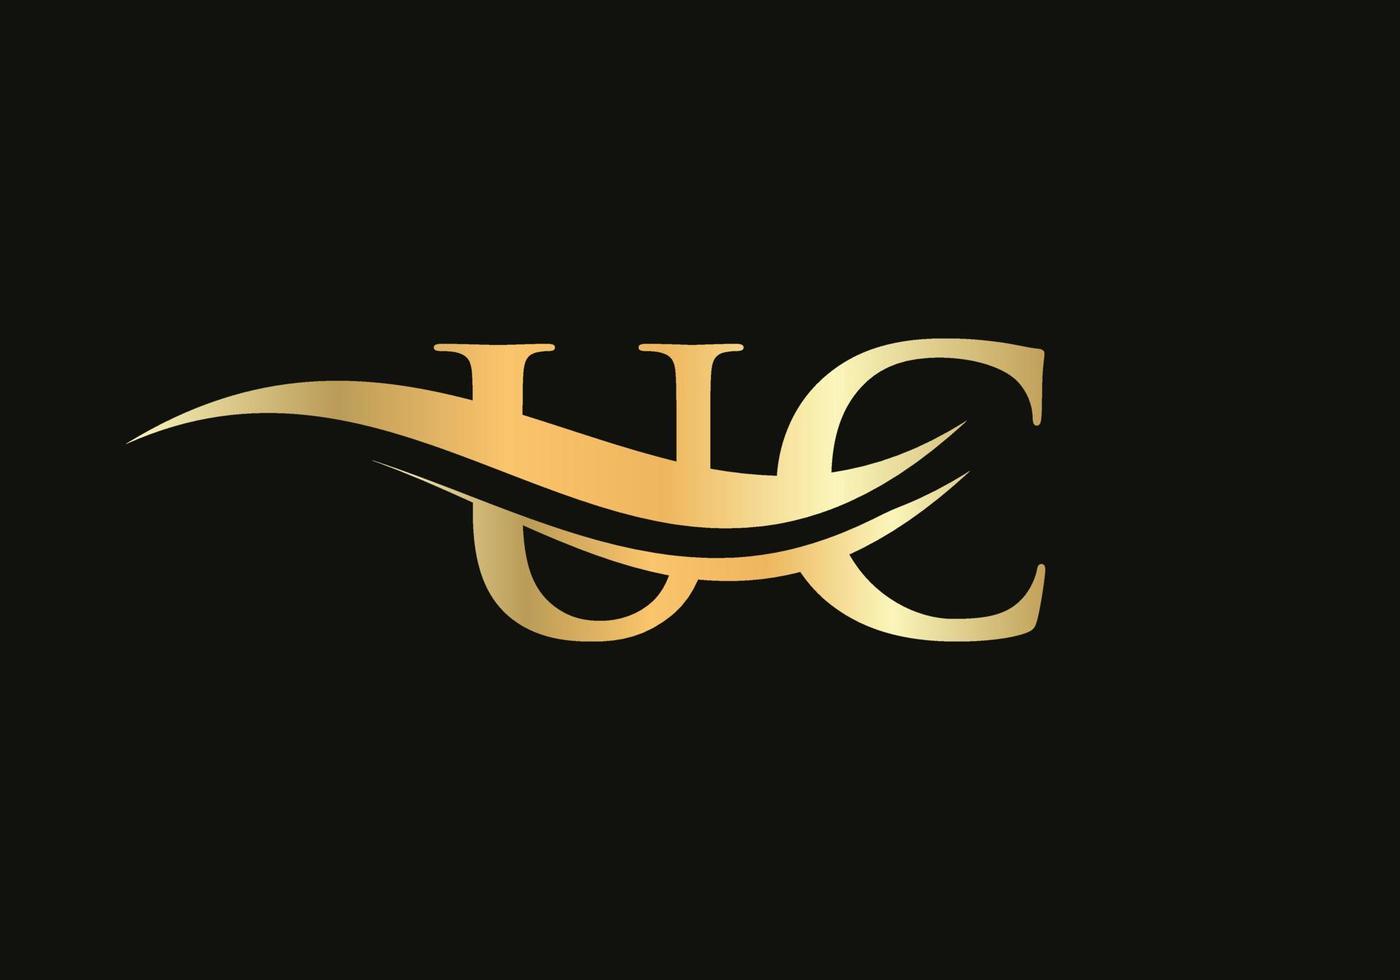 Initial Gold letter UC logo design. UC logo design with modern trendy vector